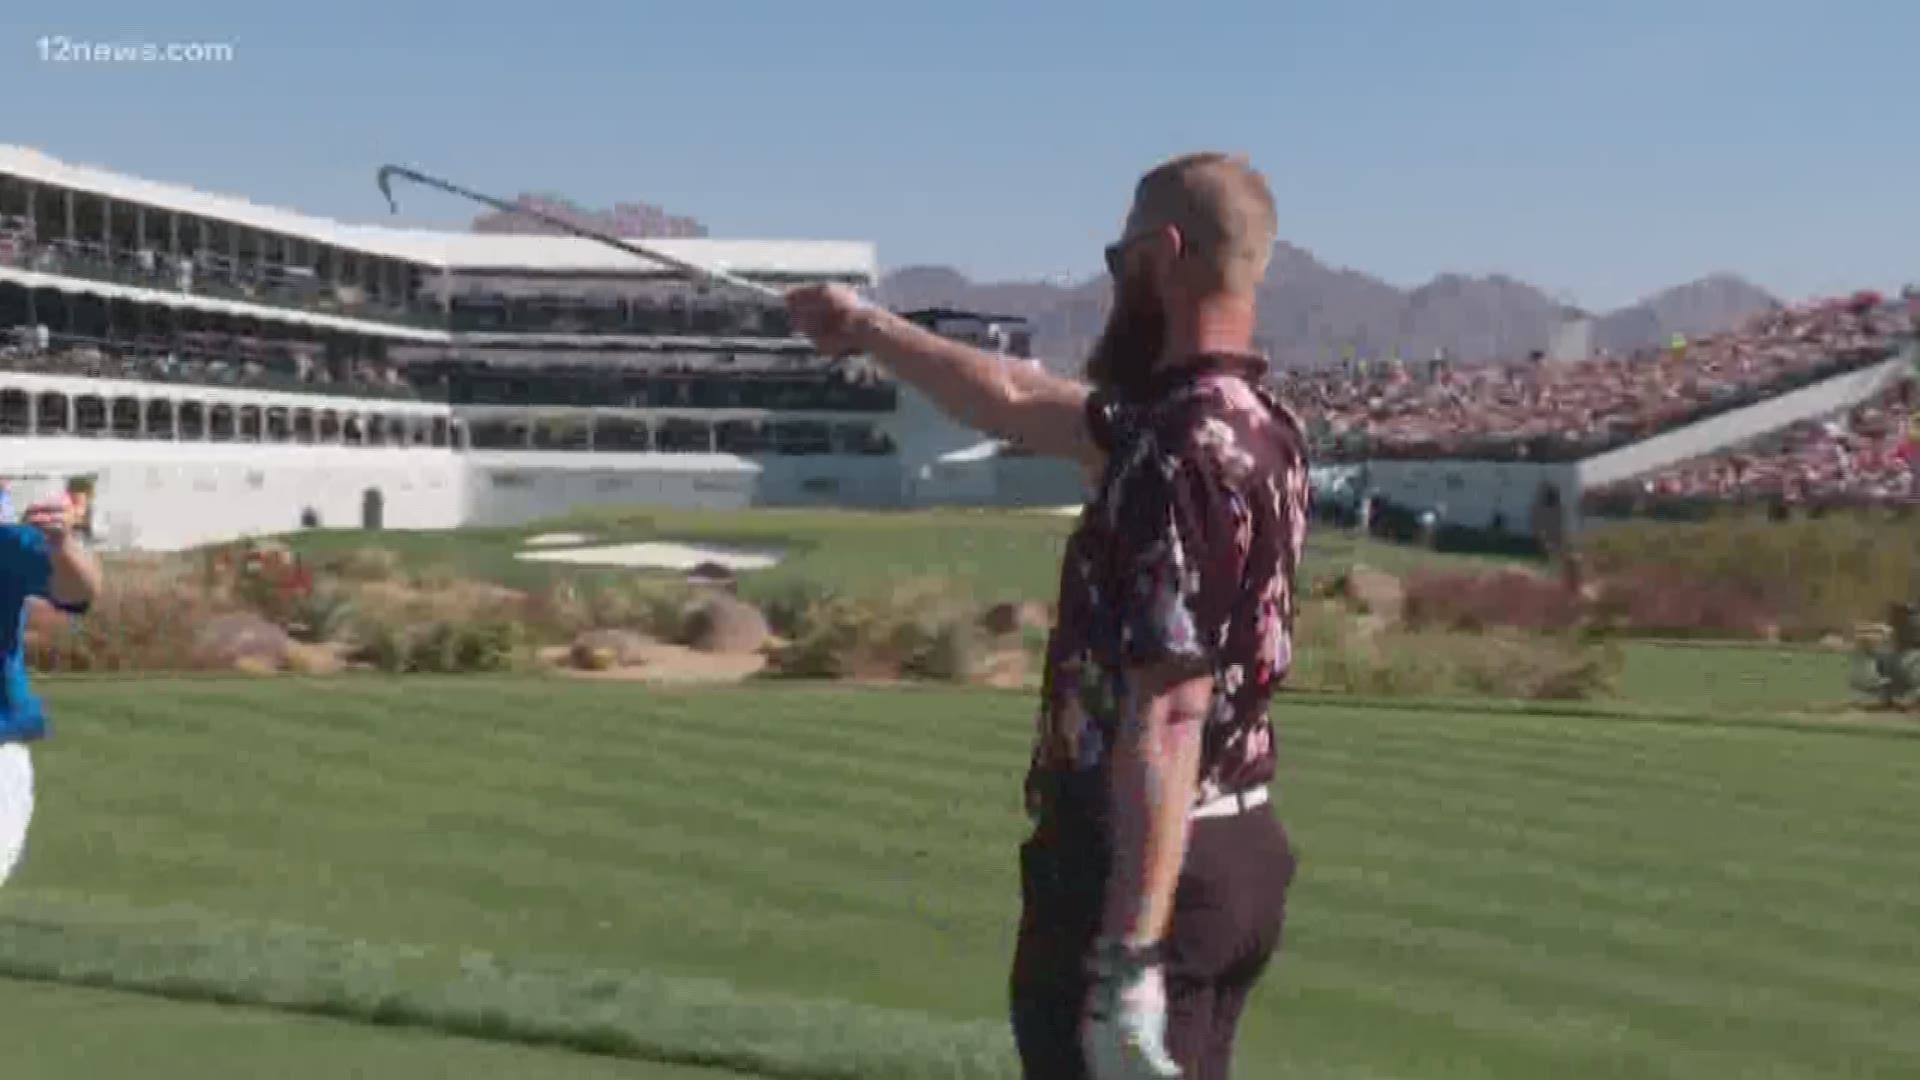 Call it the ideal father-son outing. D-Backs pitcher Archie Bradley's latest adventure stopped at the TPC Scottsdale to play in the Waste Management Phoenix Open Pro-Am Wednesday. His dad was his caddie for the second year in a row.